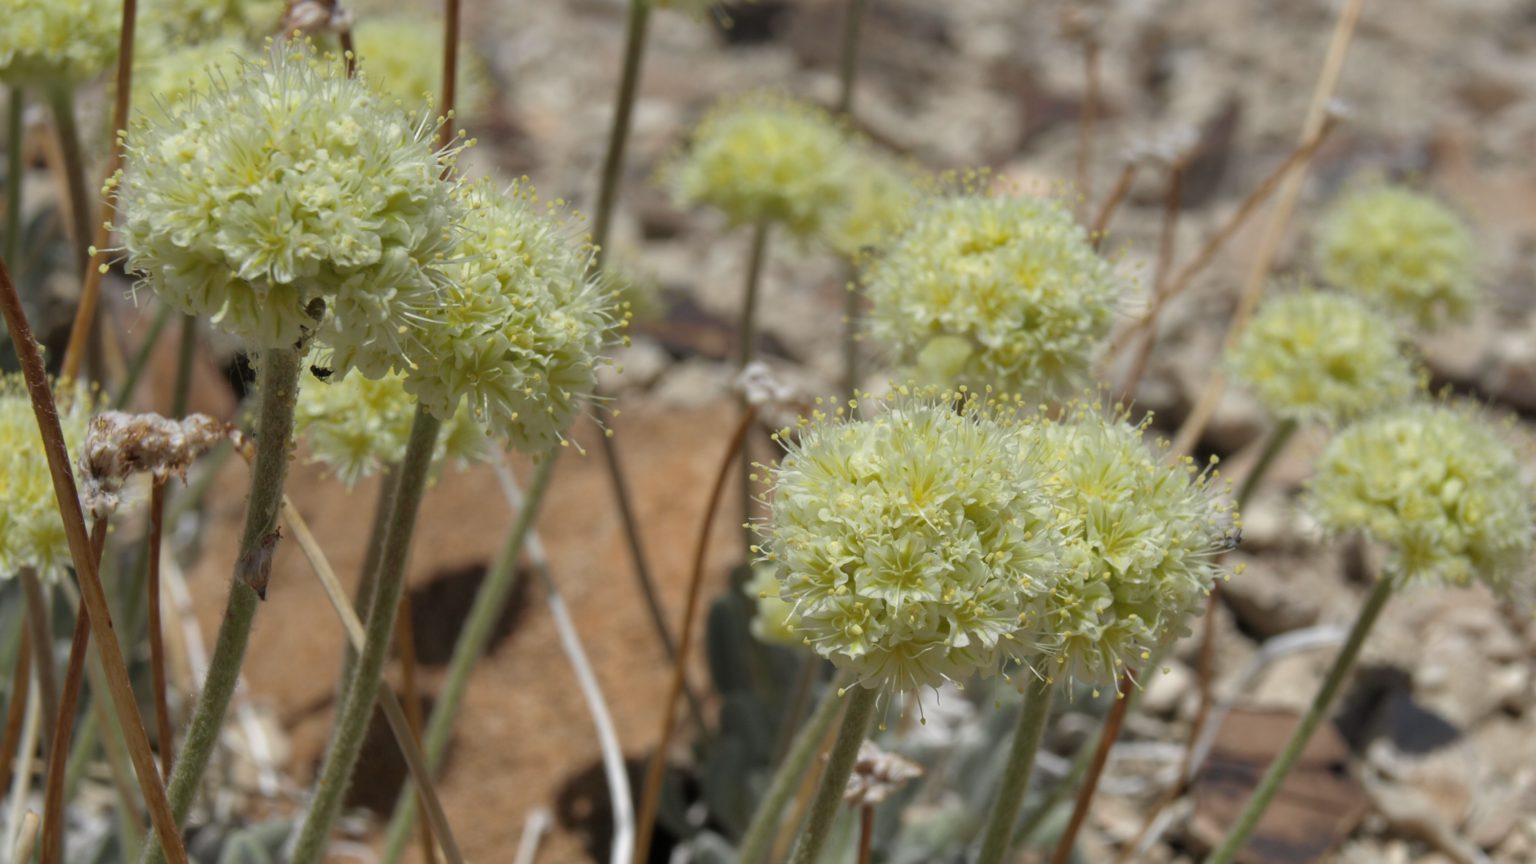 US to list Nevada flower as endangered, dealing blow to ioneer’s lithium project